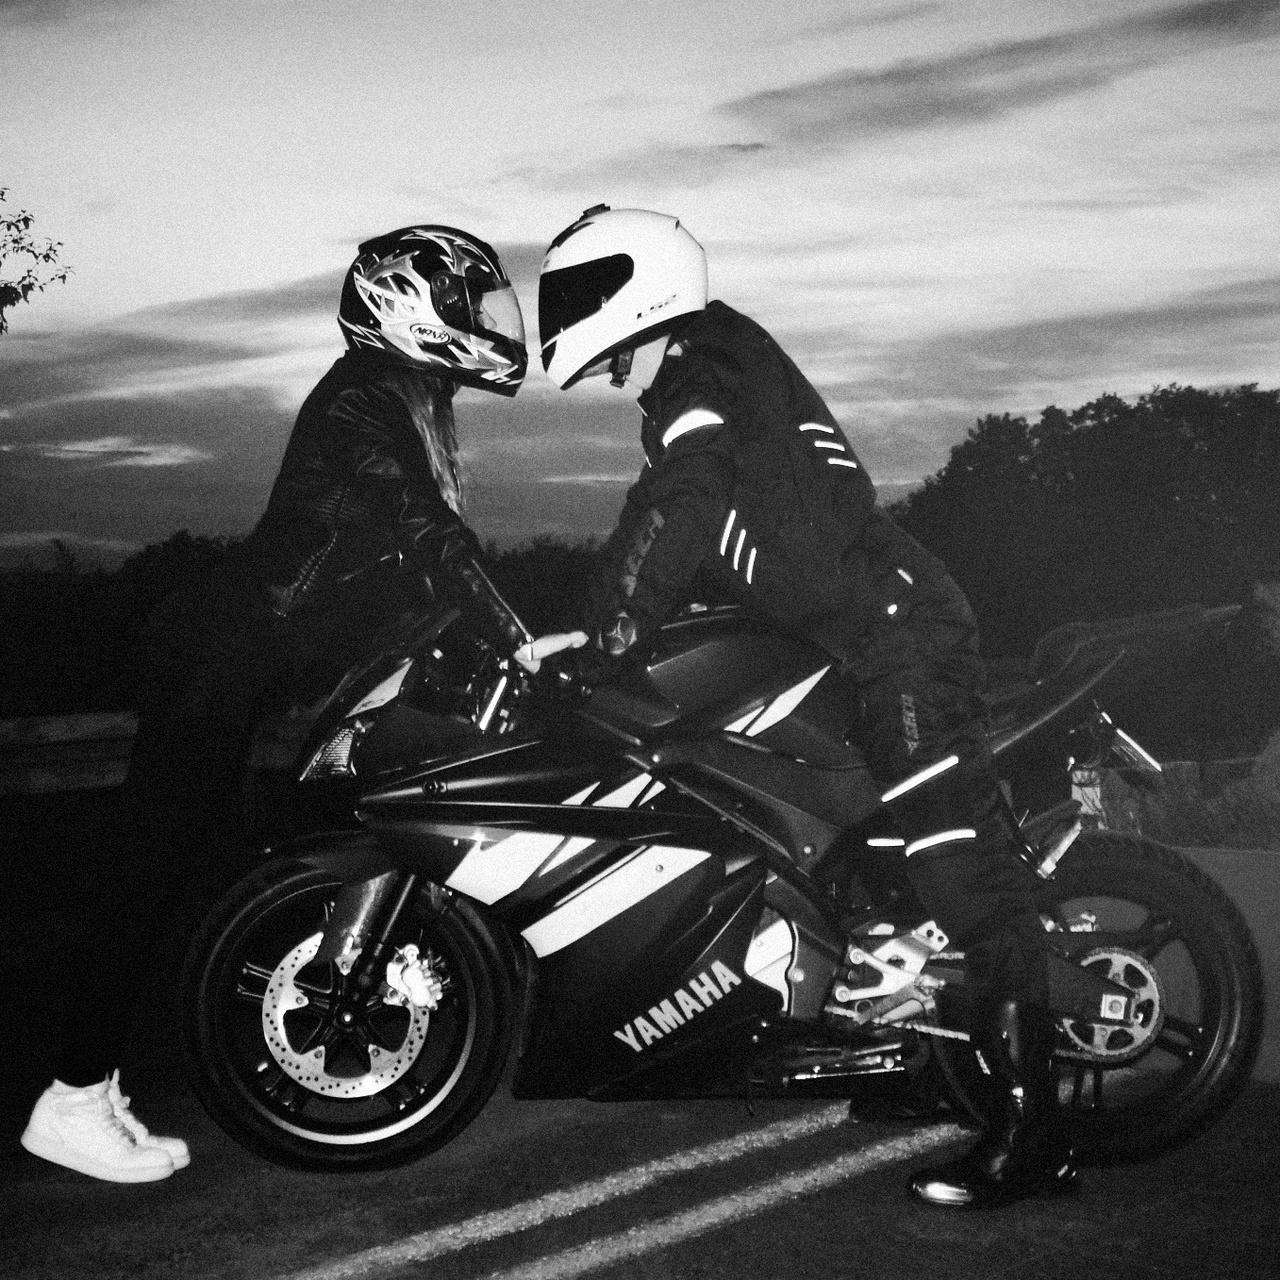 image about motorcycle couples. See more